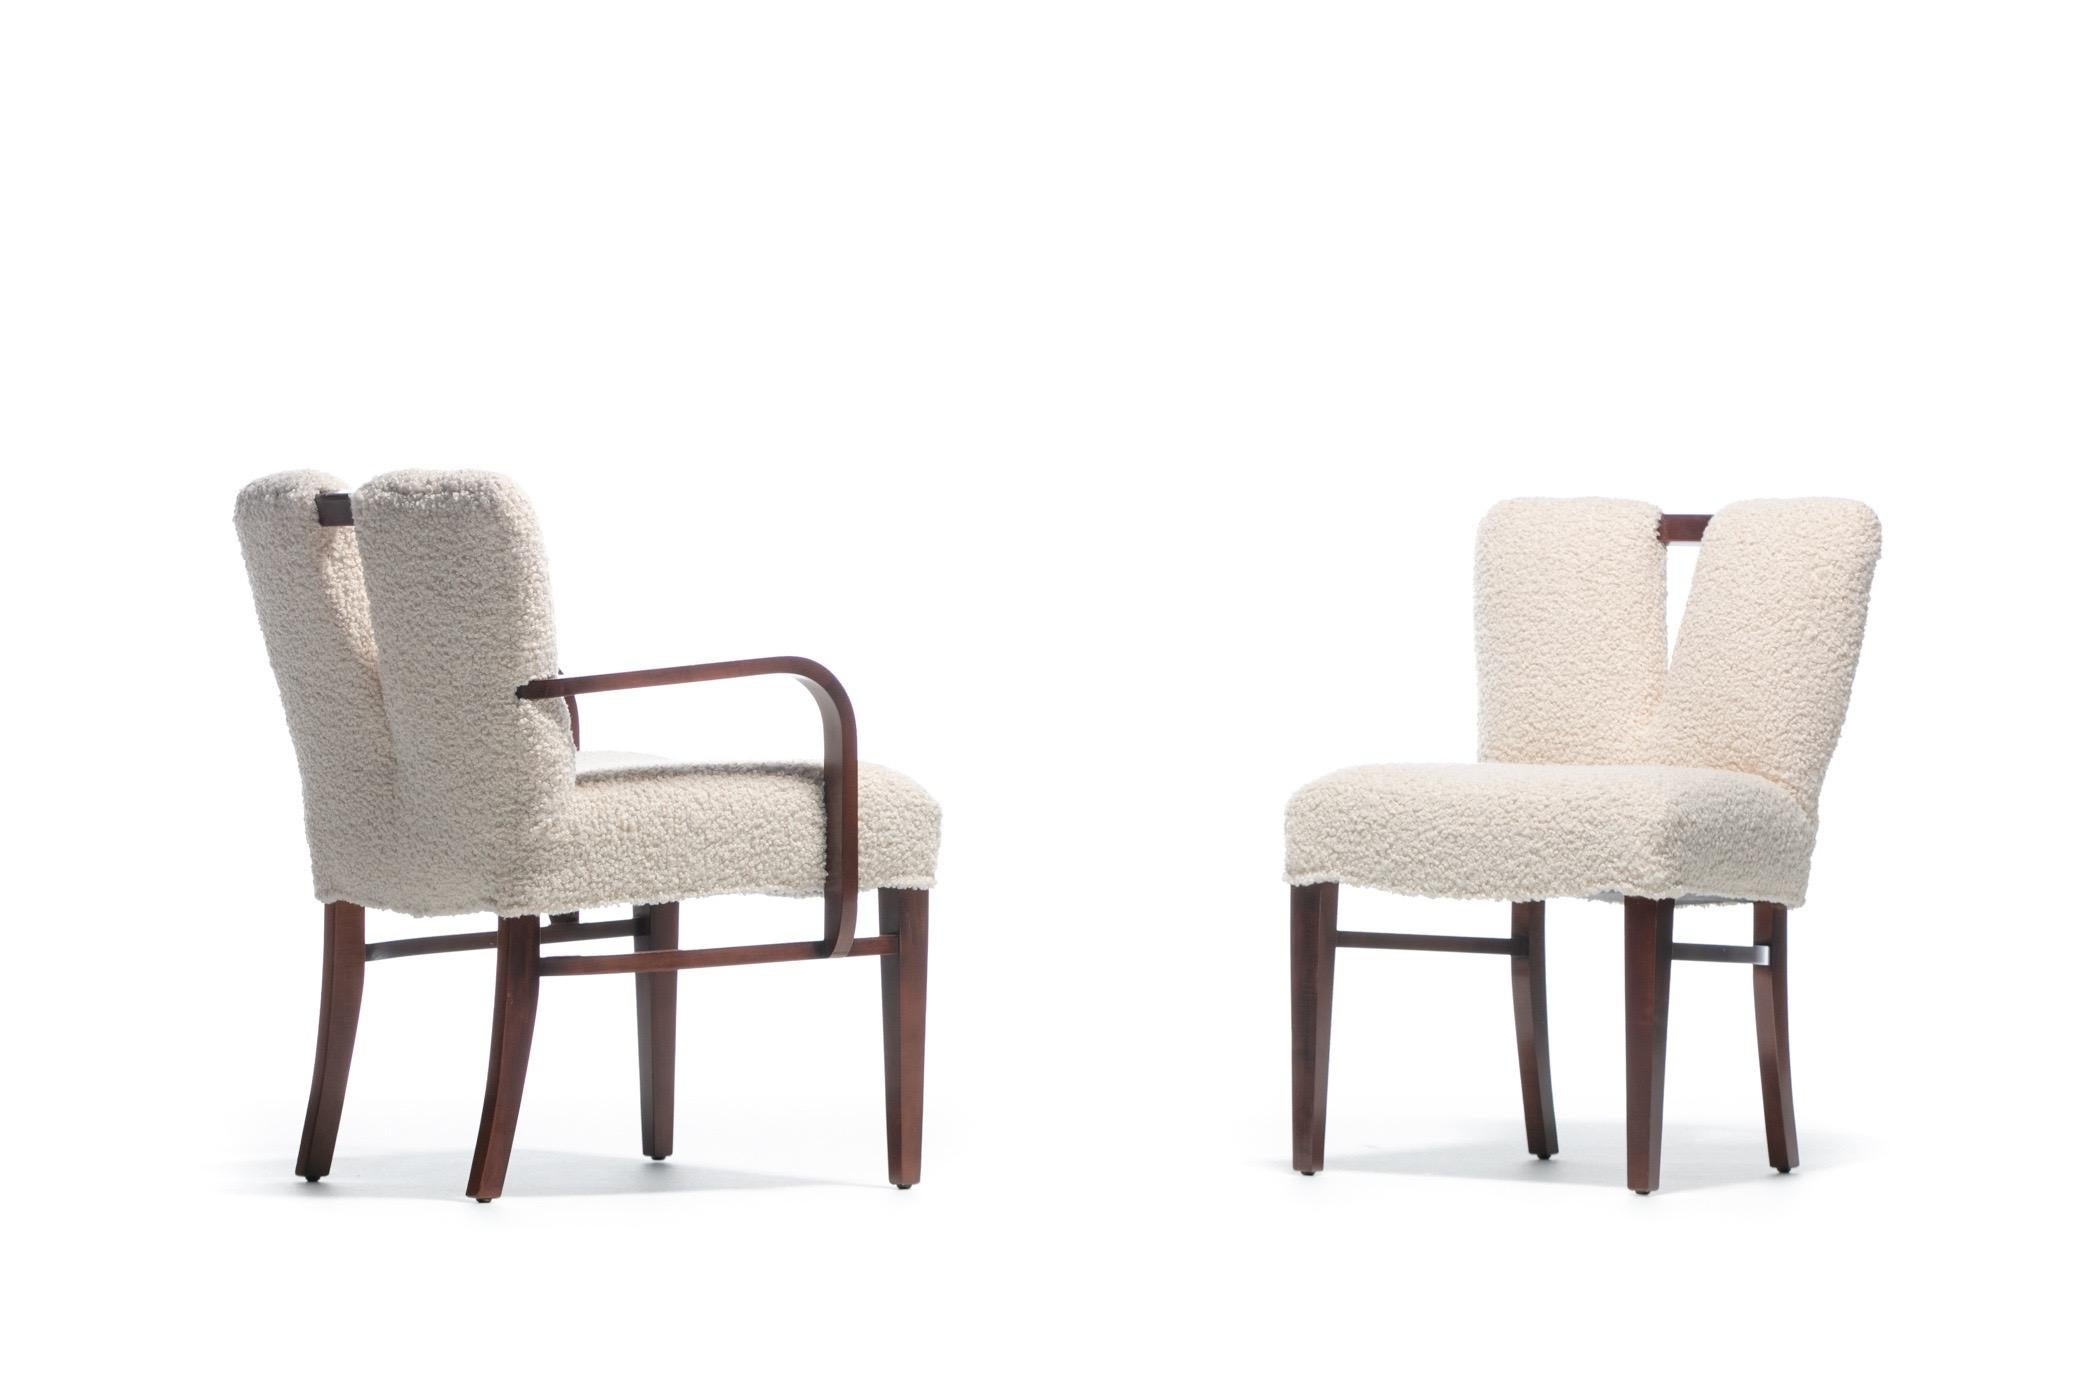 American Set of 18 Paul Frankl Corset Back Dining Chairs in Ivory White Bouclé, c. 1950s